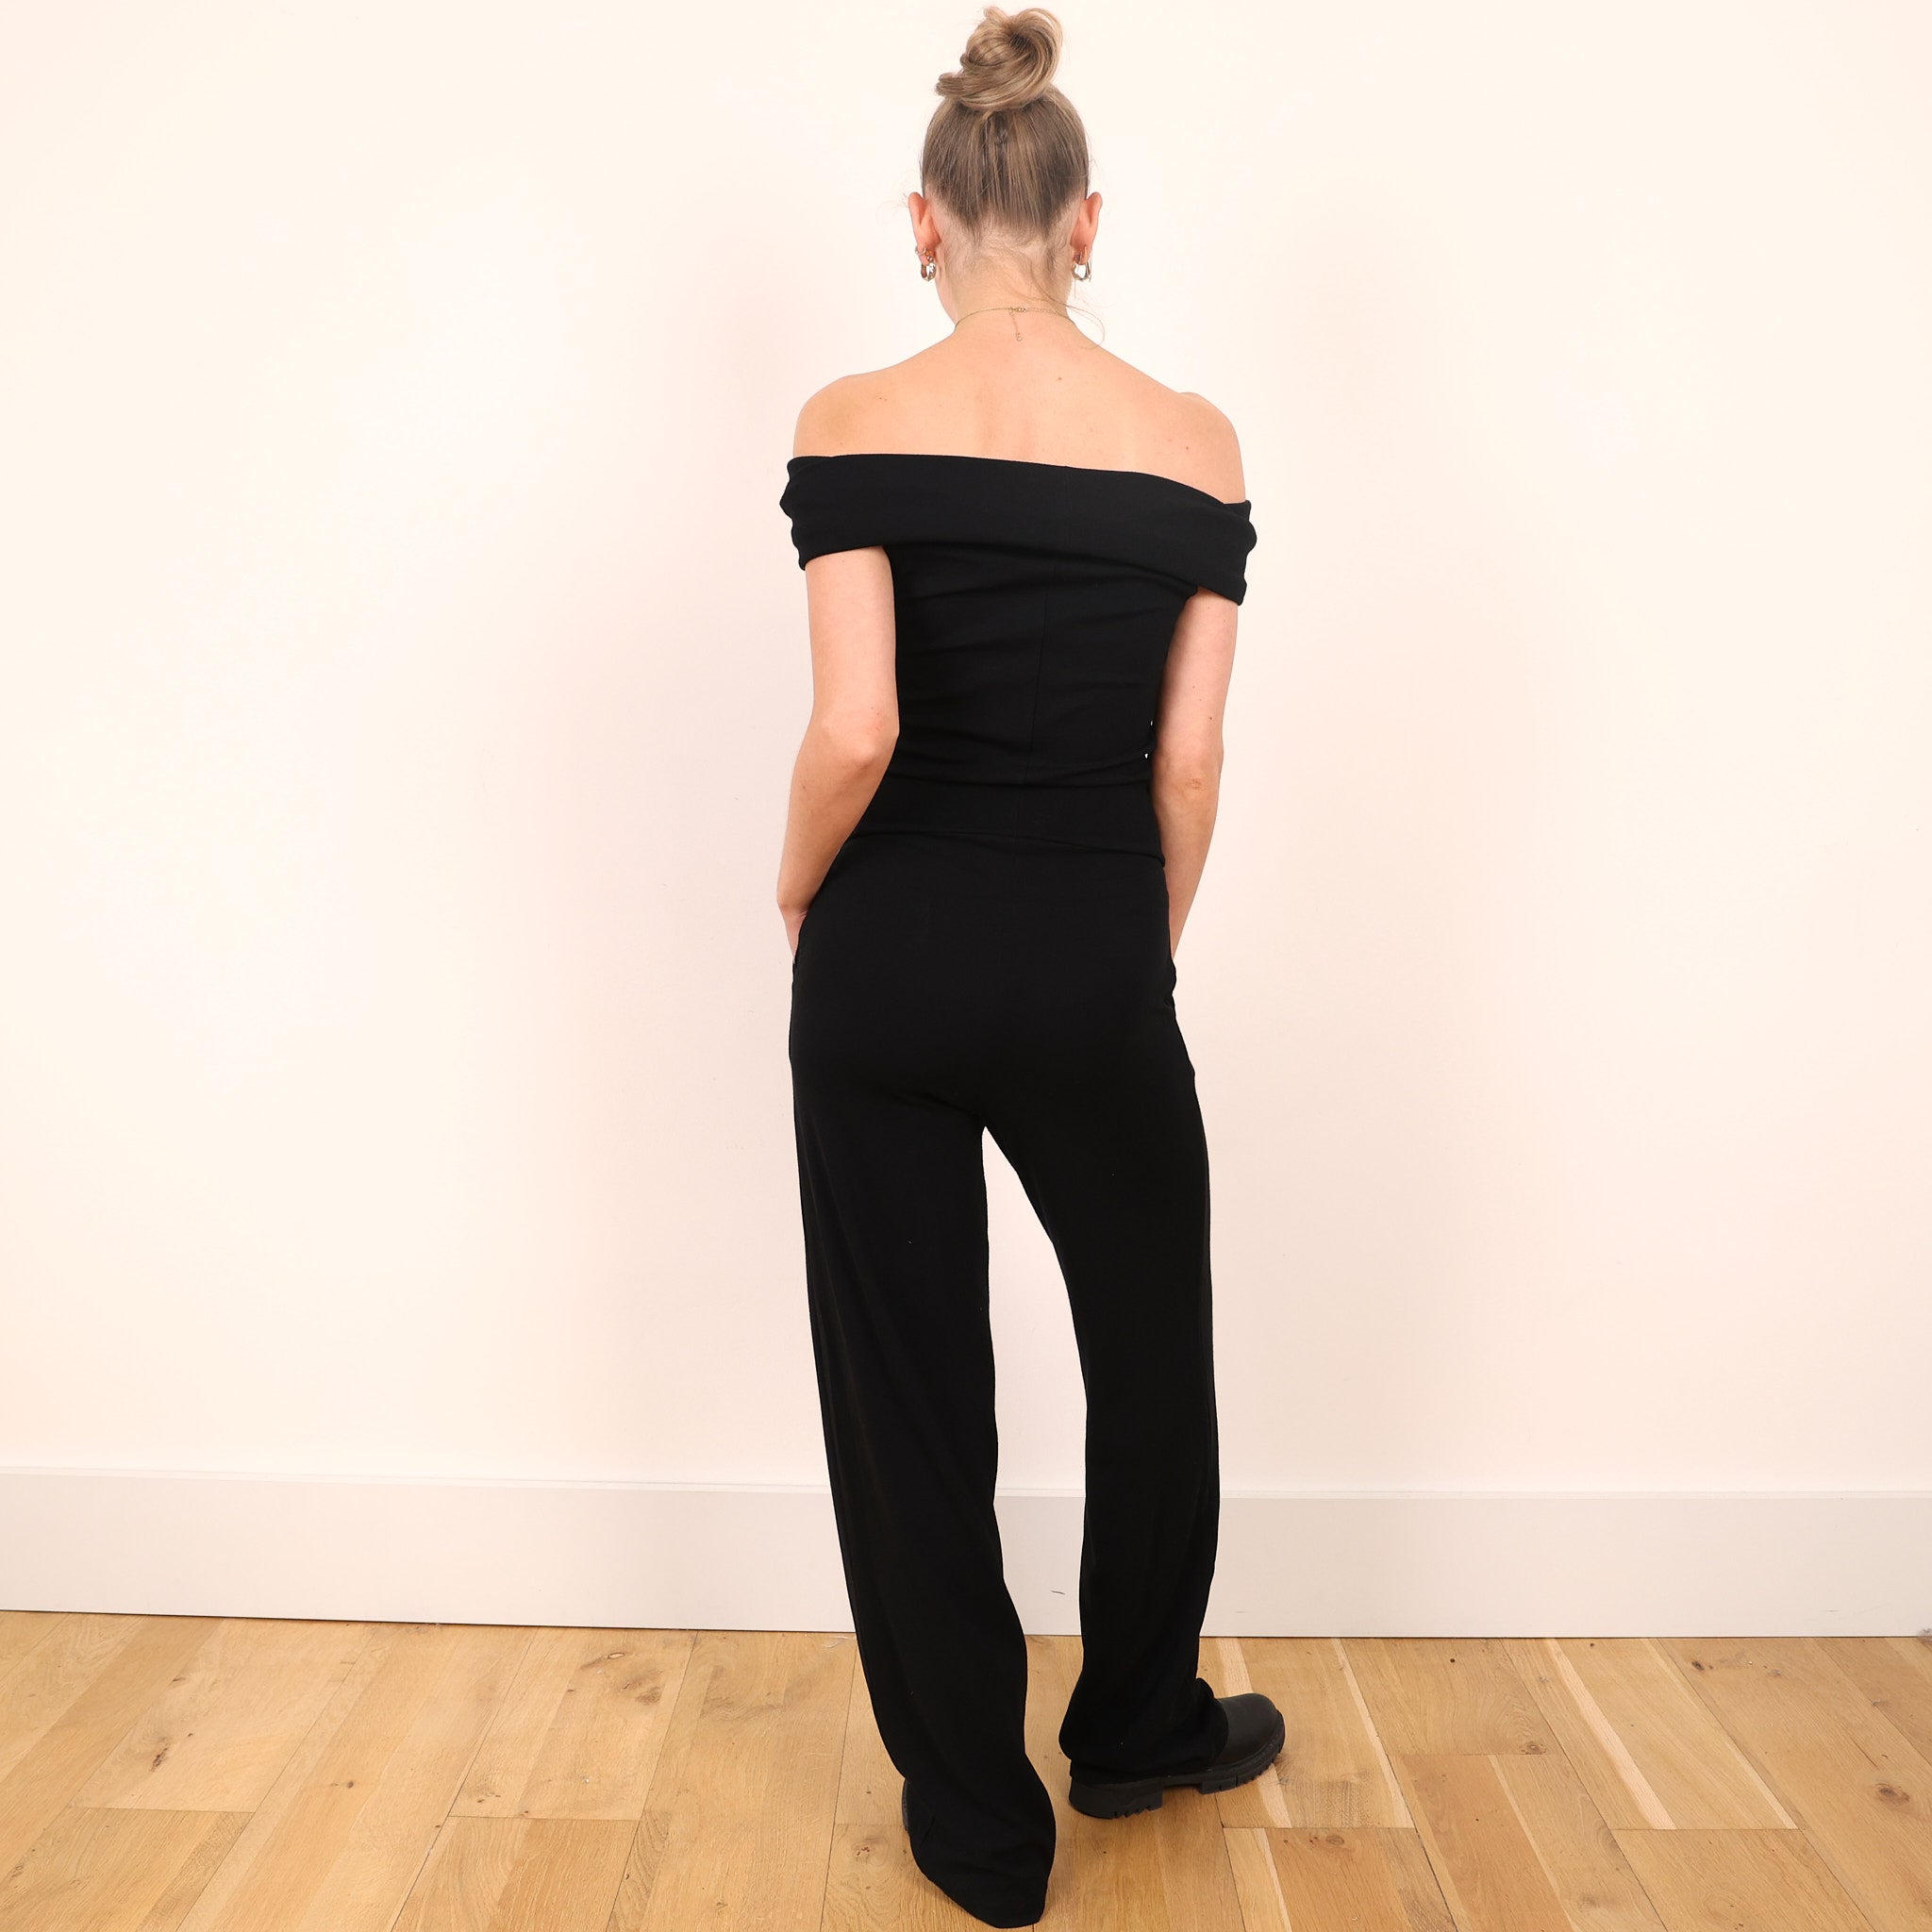 ATOM LABEL carbon jumpsuit in black - New In from Yumi UK